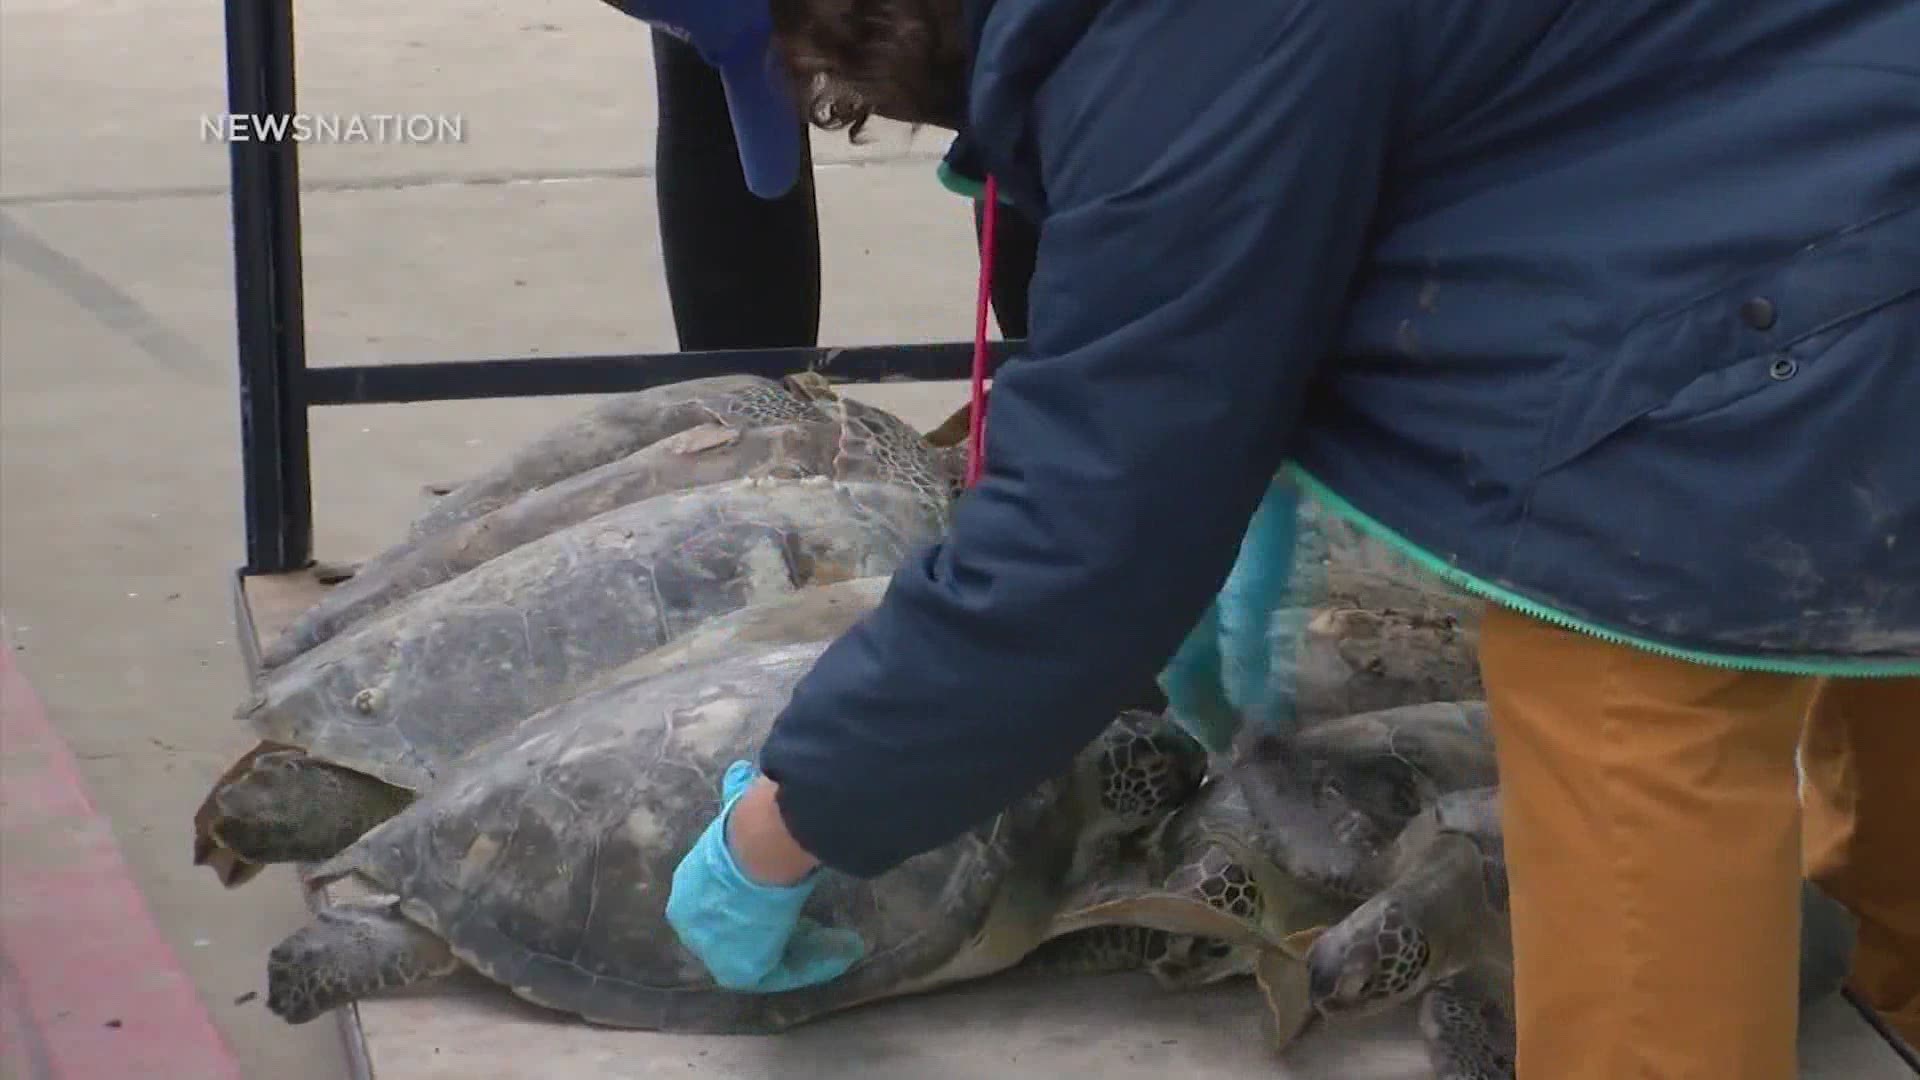 More than 2,000 rescued sea turtles have been released back into the warmer waters of the Gulf of Mexico off the coasts of Corpus Christi and South Padre Island.